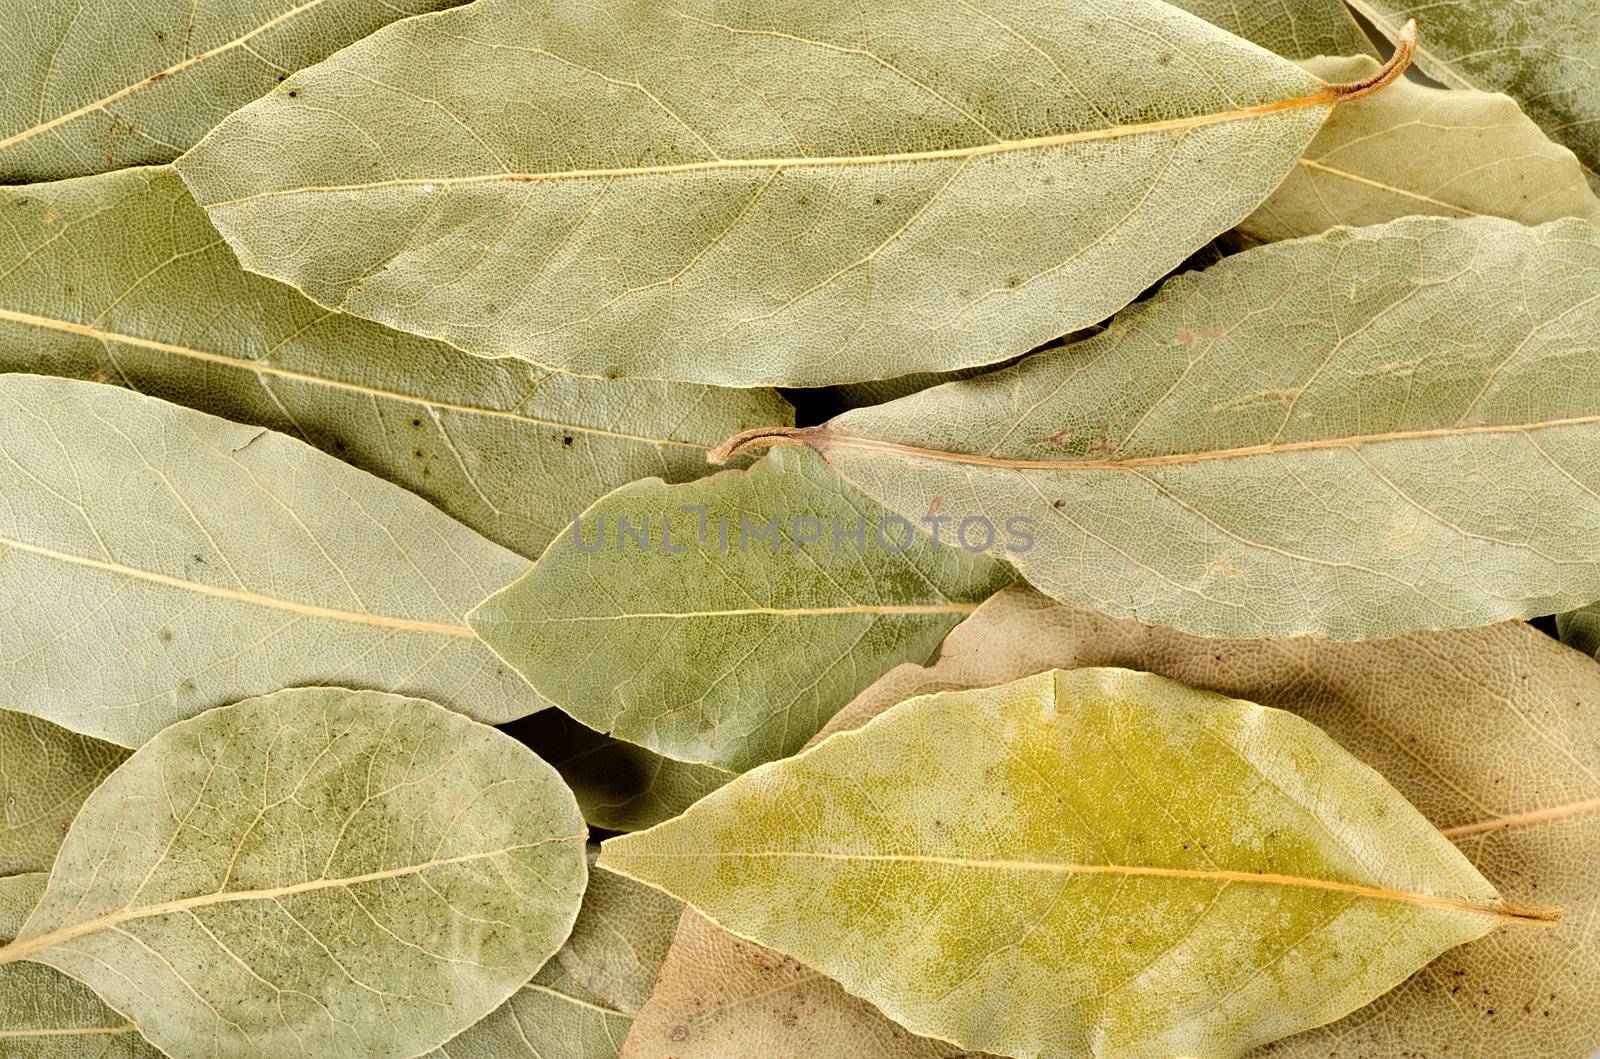 Arrangement of bay leaves in various shades of green